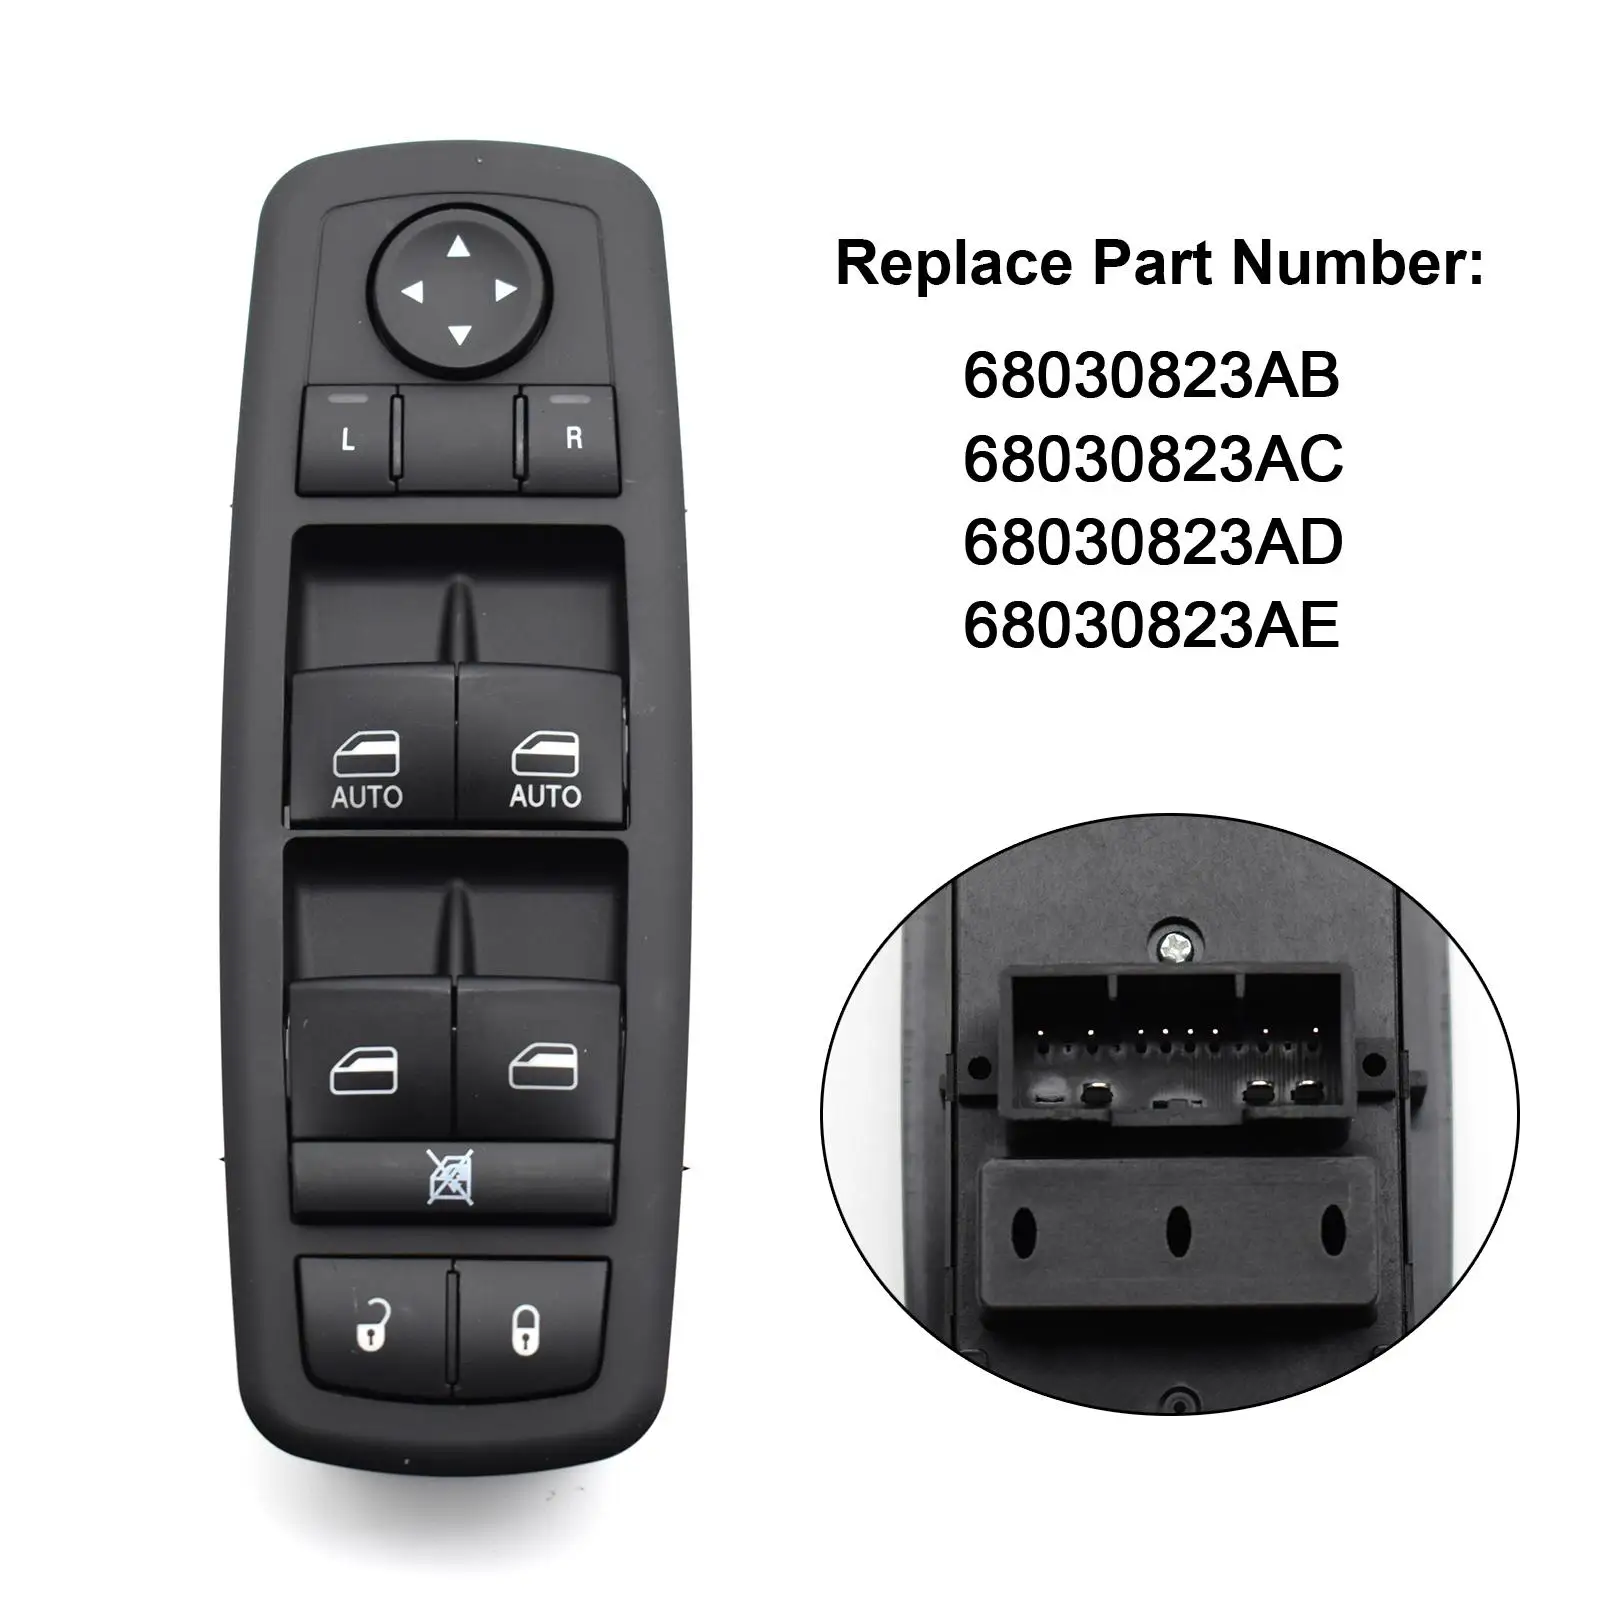 

Car Front Left Power Master Window Switch For Dodge Durango Jeep Grand Cherokee 2011 2012 2013 68030823AB 68030823AD 68030823AE